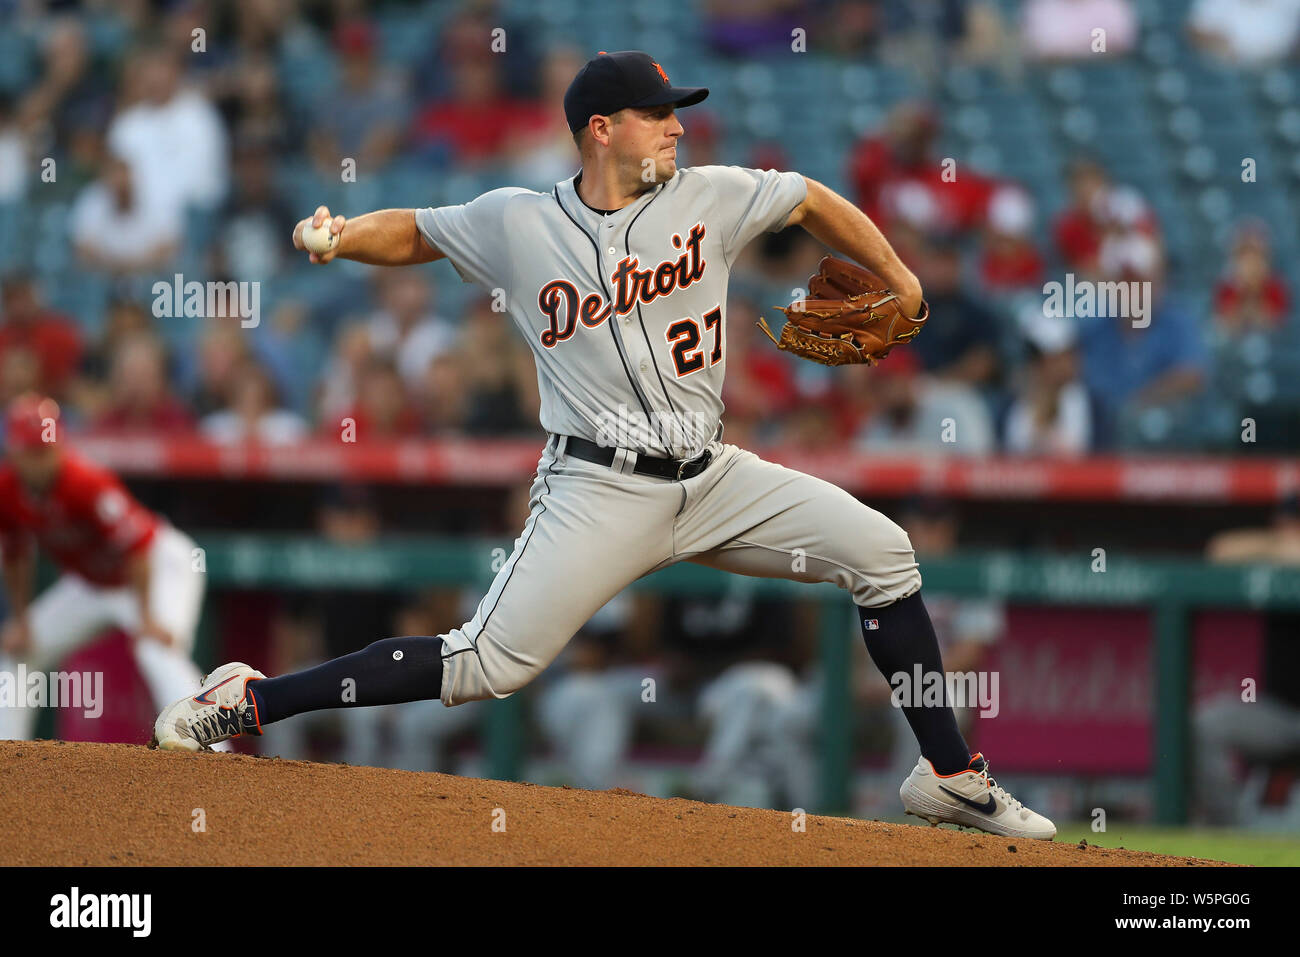 Anaheim, California, USA. July 29, 2019: Detroit Tigers starting pitcher Jordan Zimmermann (27) makes the start for the Tigers during the game between the Detroit Tigers and the Los Angeles Angels of Anaheim at Angel Stadium in Anaheim, CA, (Photo by Peter Joneleit, Cal Sport Media) Stock Photo